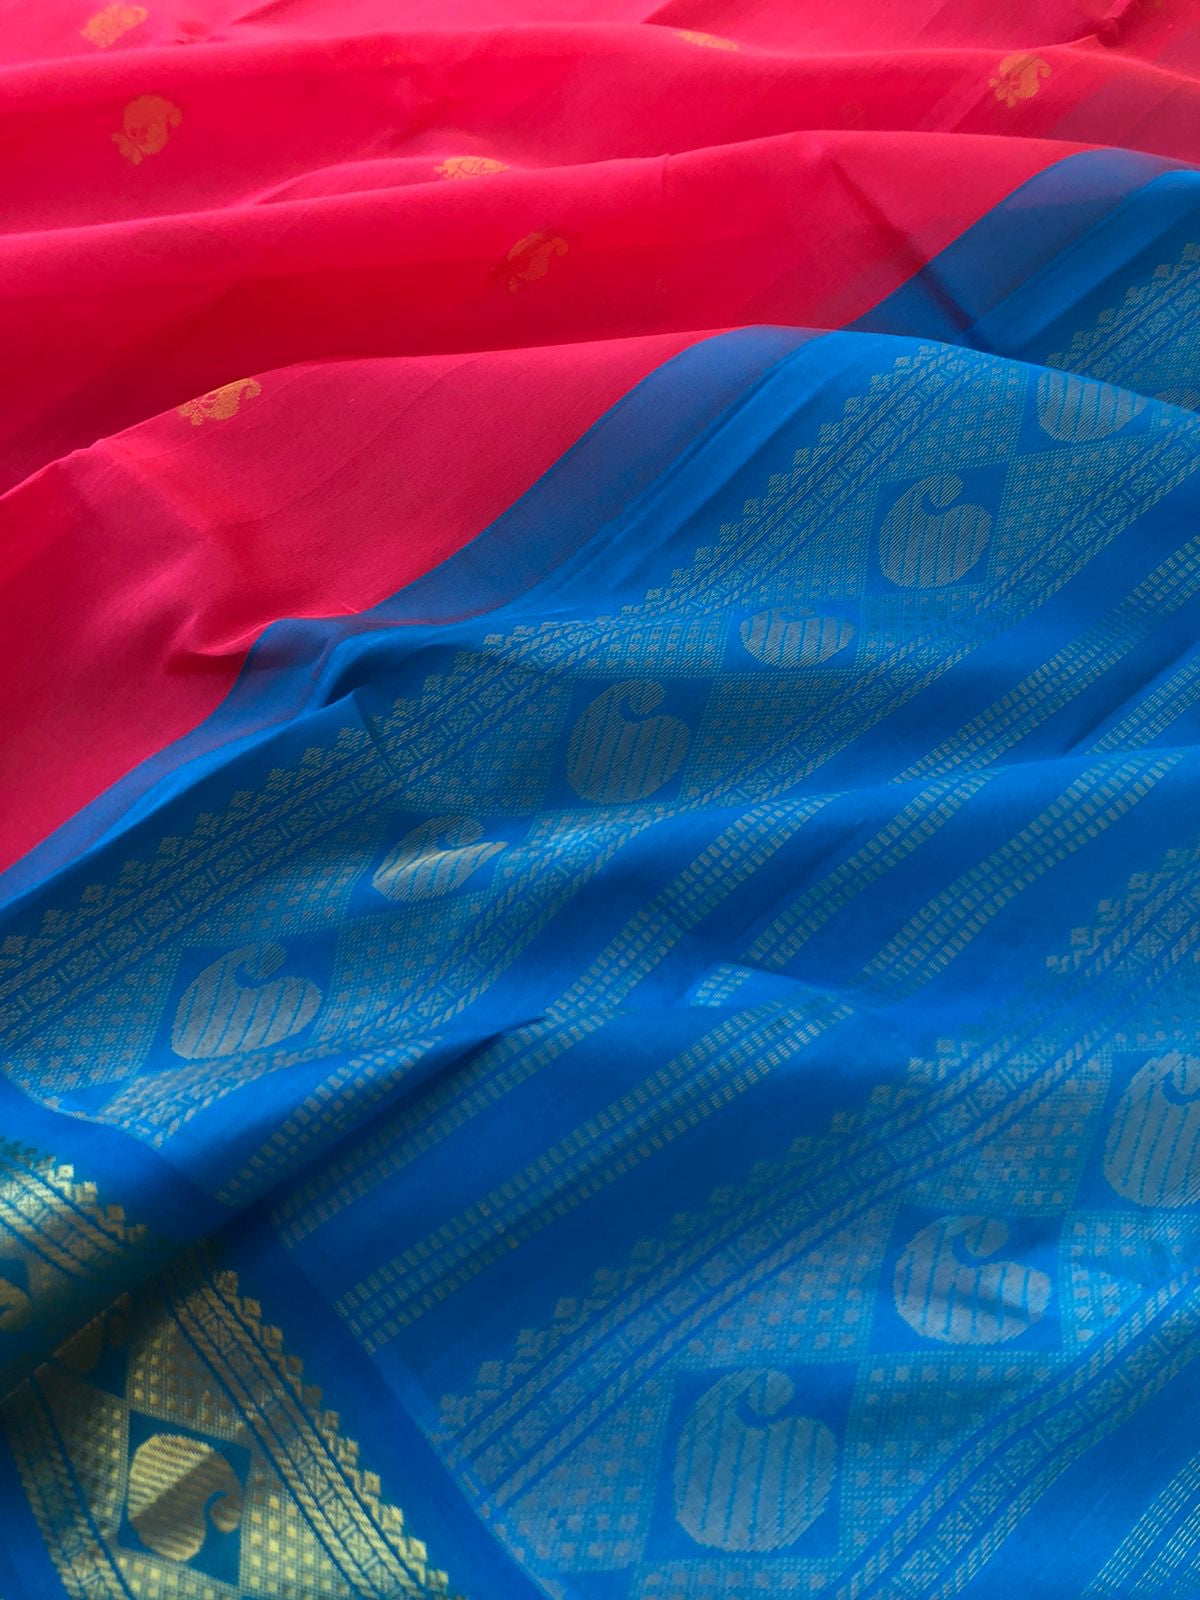 Margazhi Vibrs on Korvai Silk Cotton - pink and sulphate blue